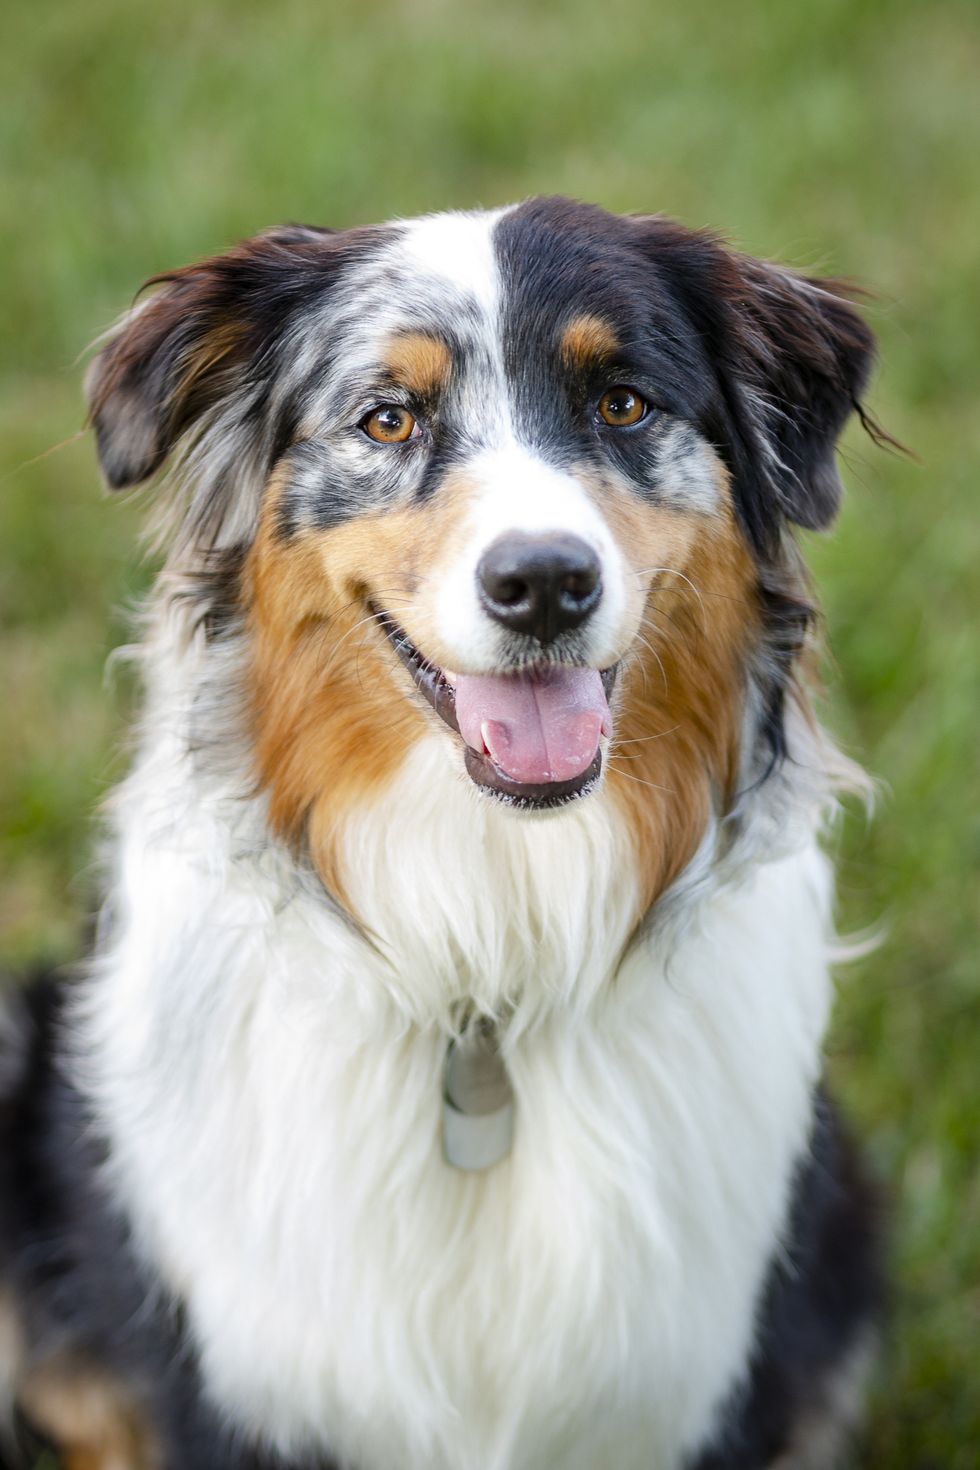 30 Best Large Dog Breeds - Big Dogs for Your Family